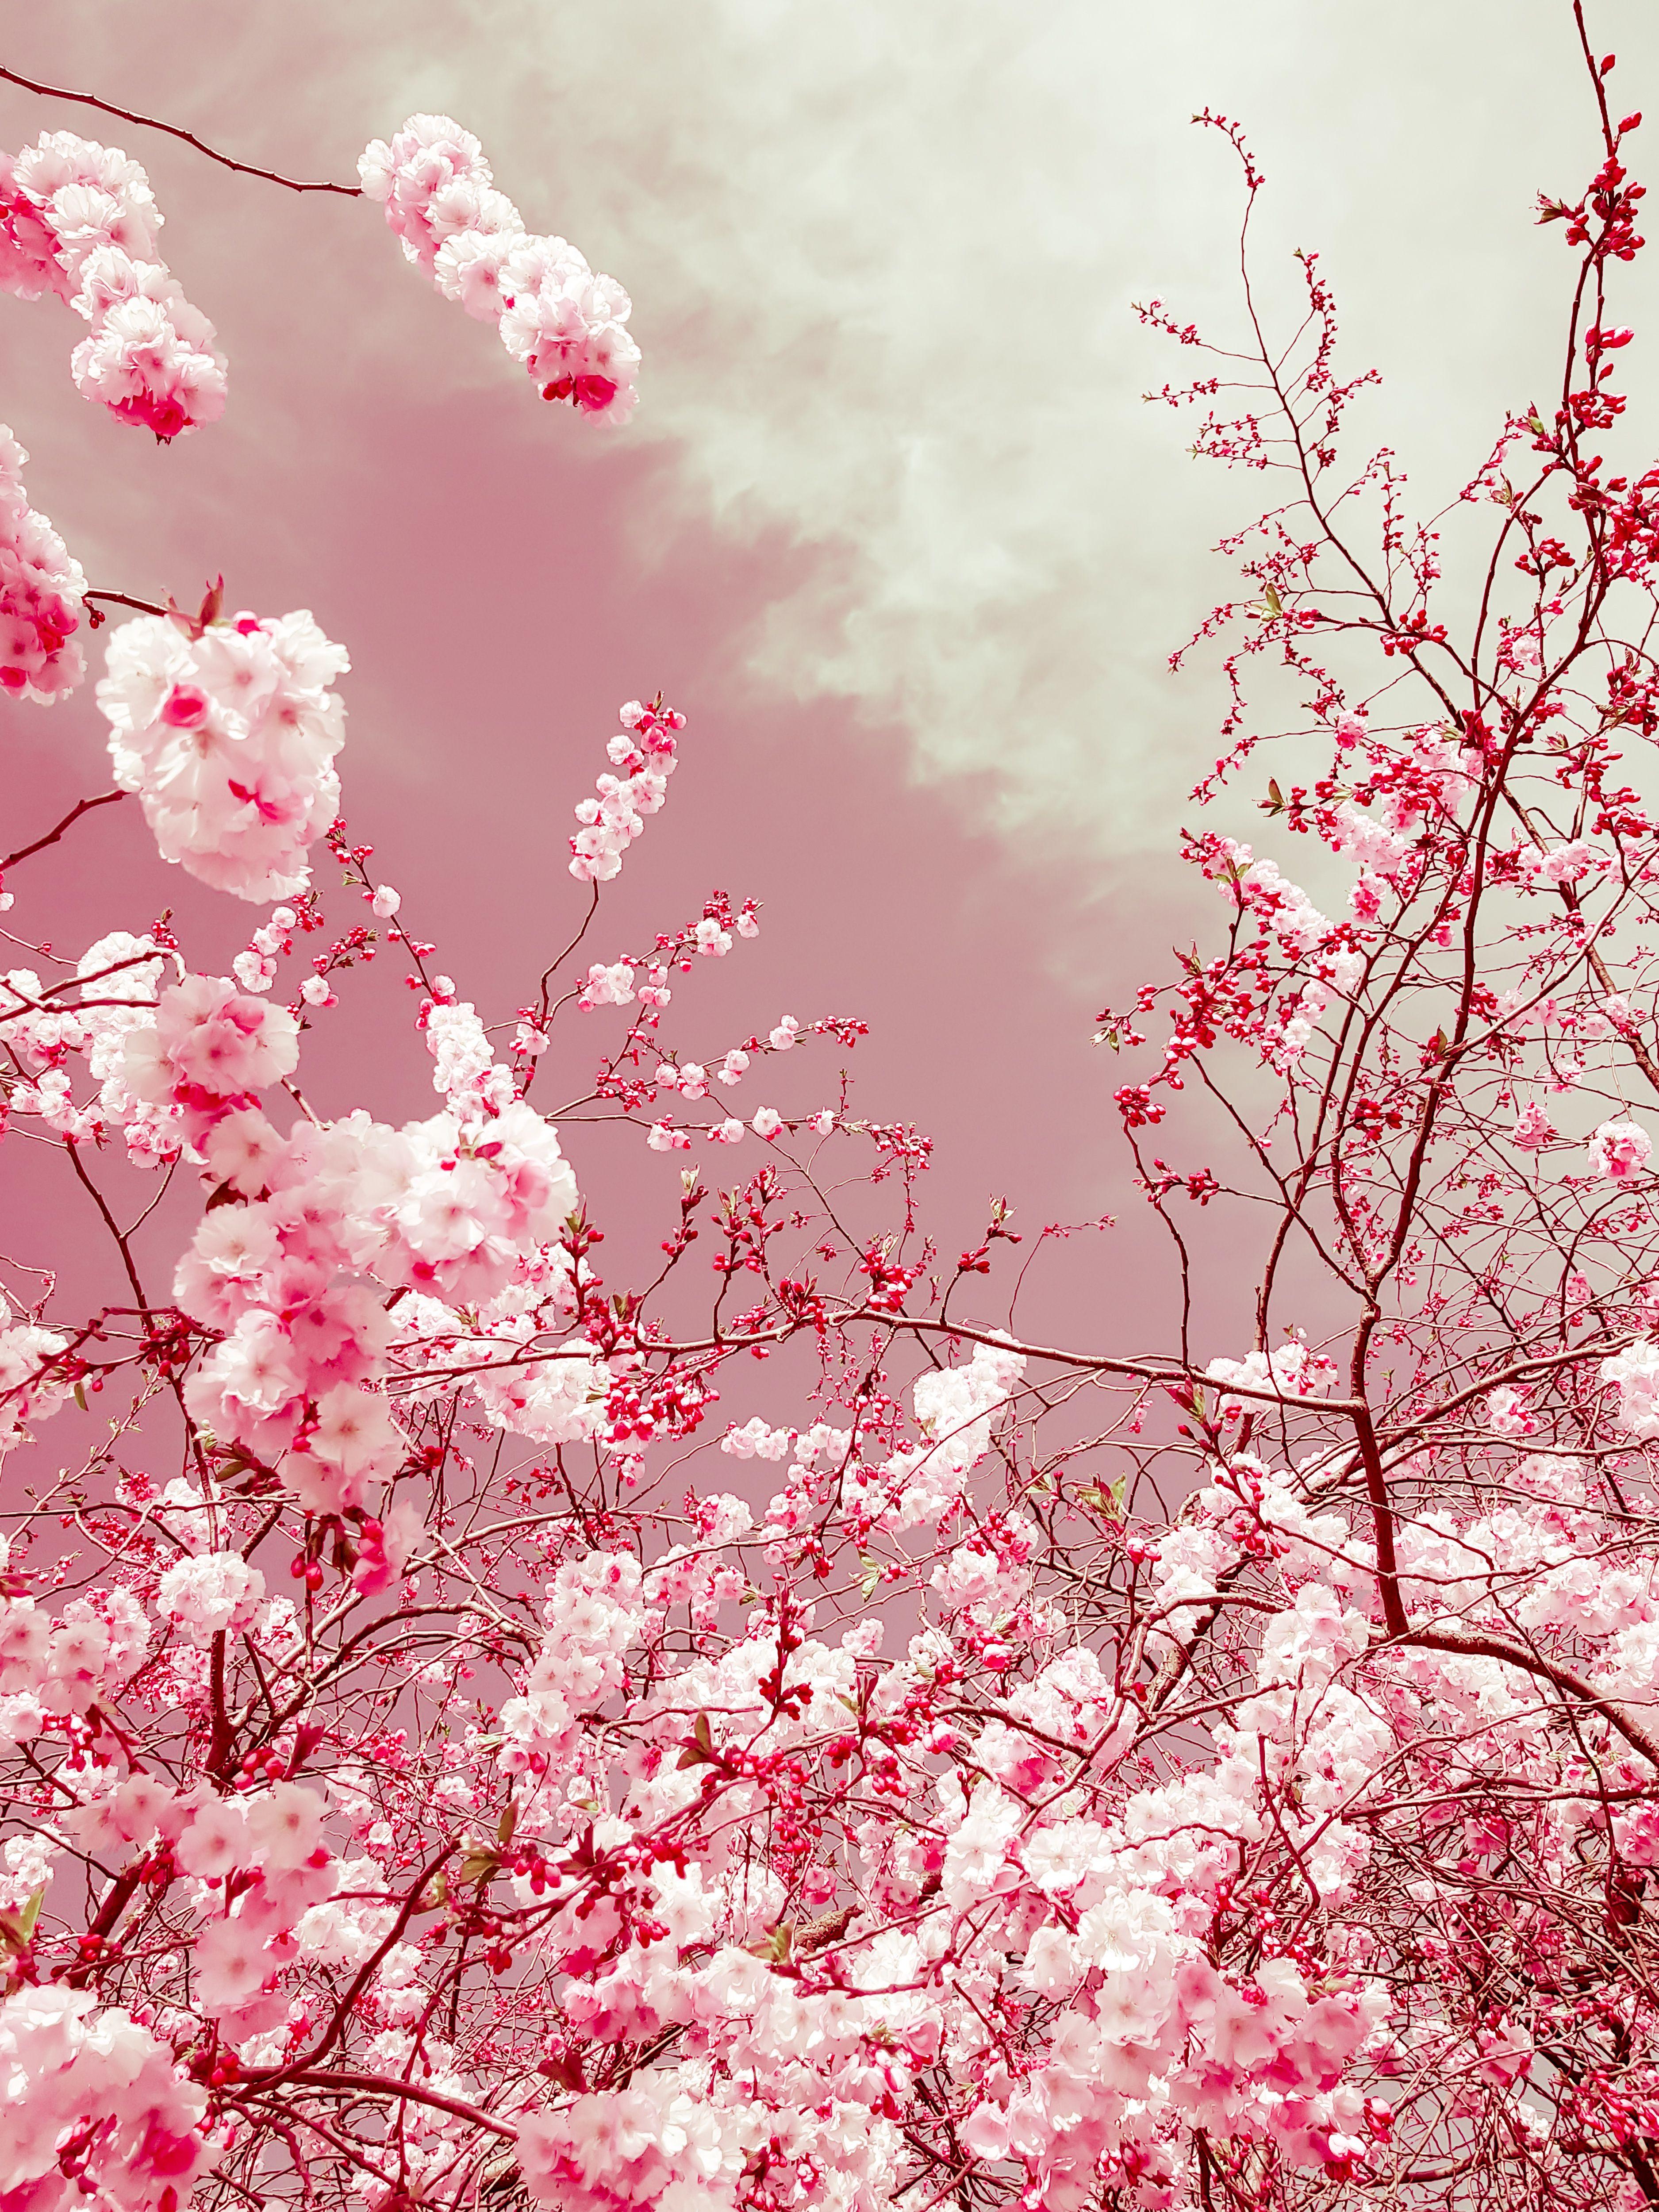 Viet Ha Tran Color Photograph - The colors of spring, Photograph, C-Type